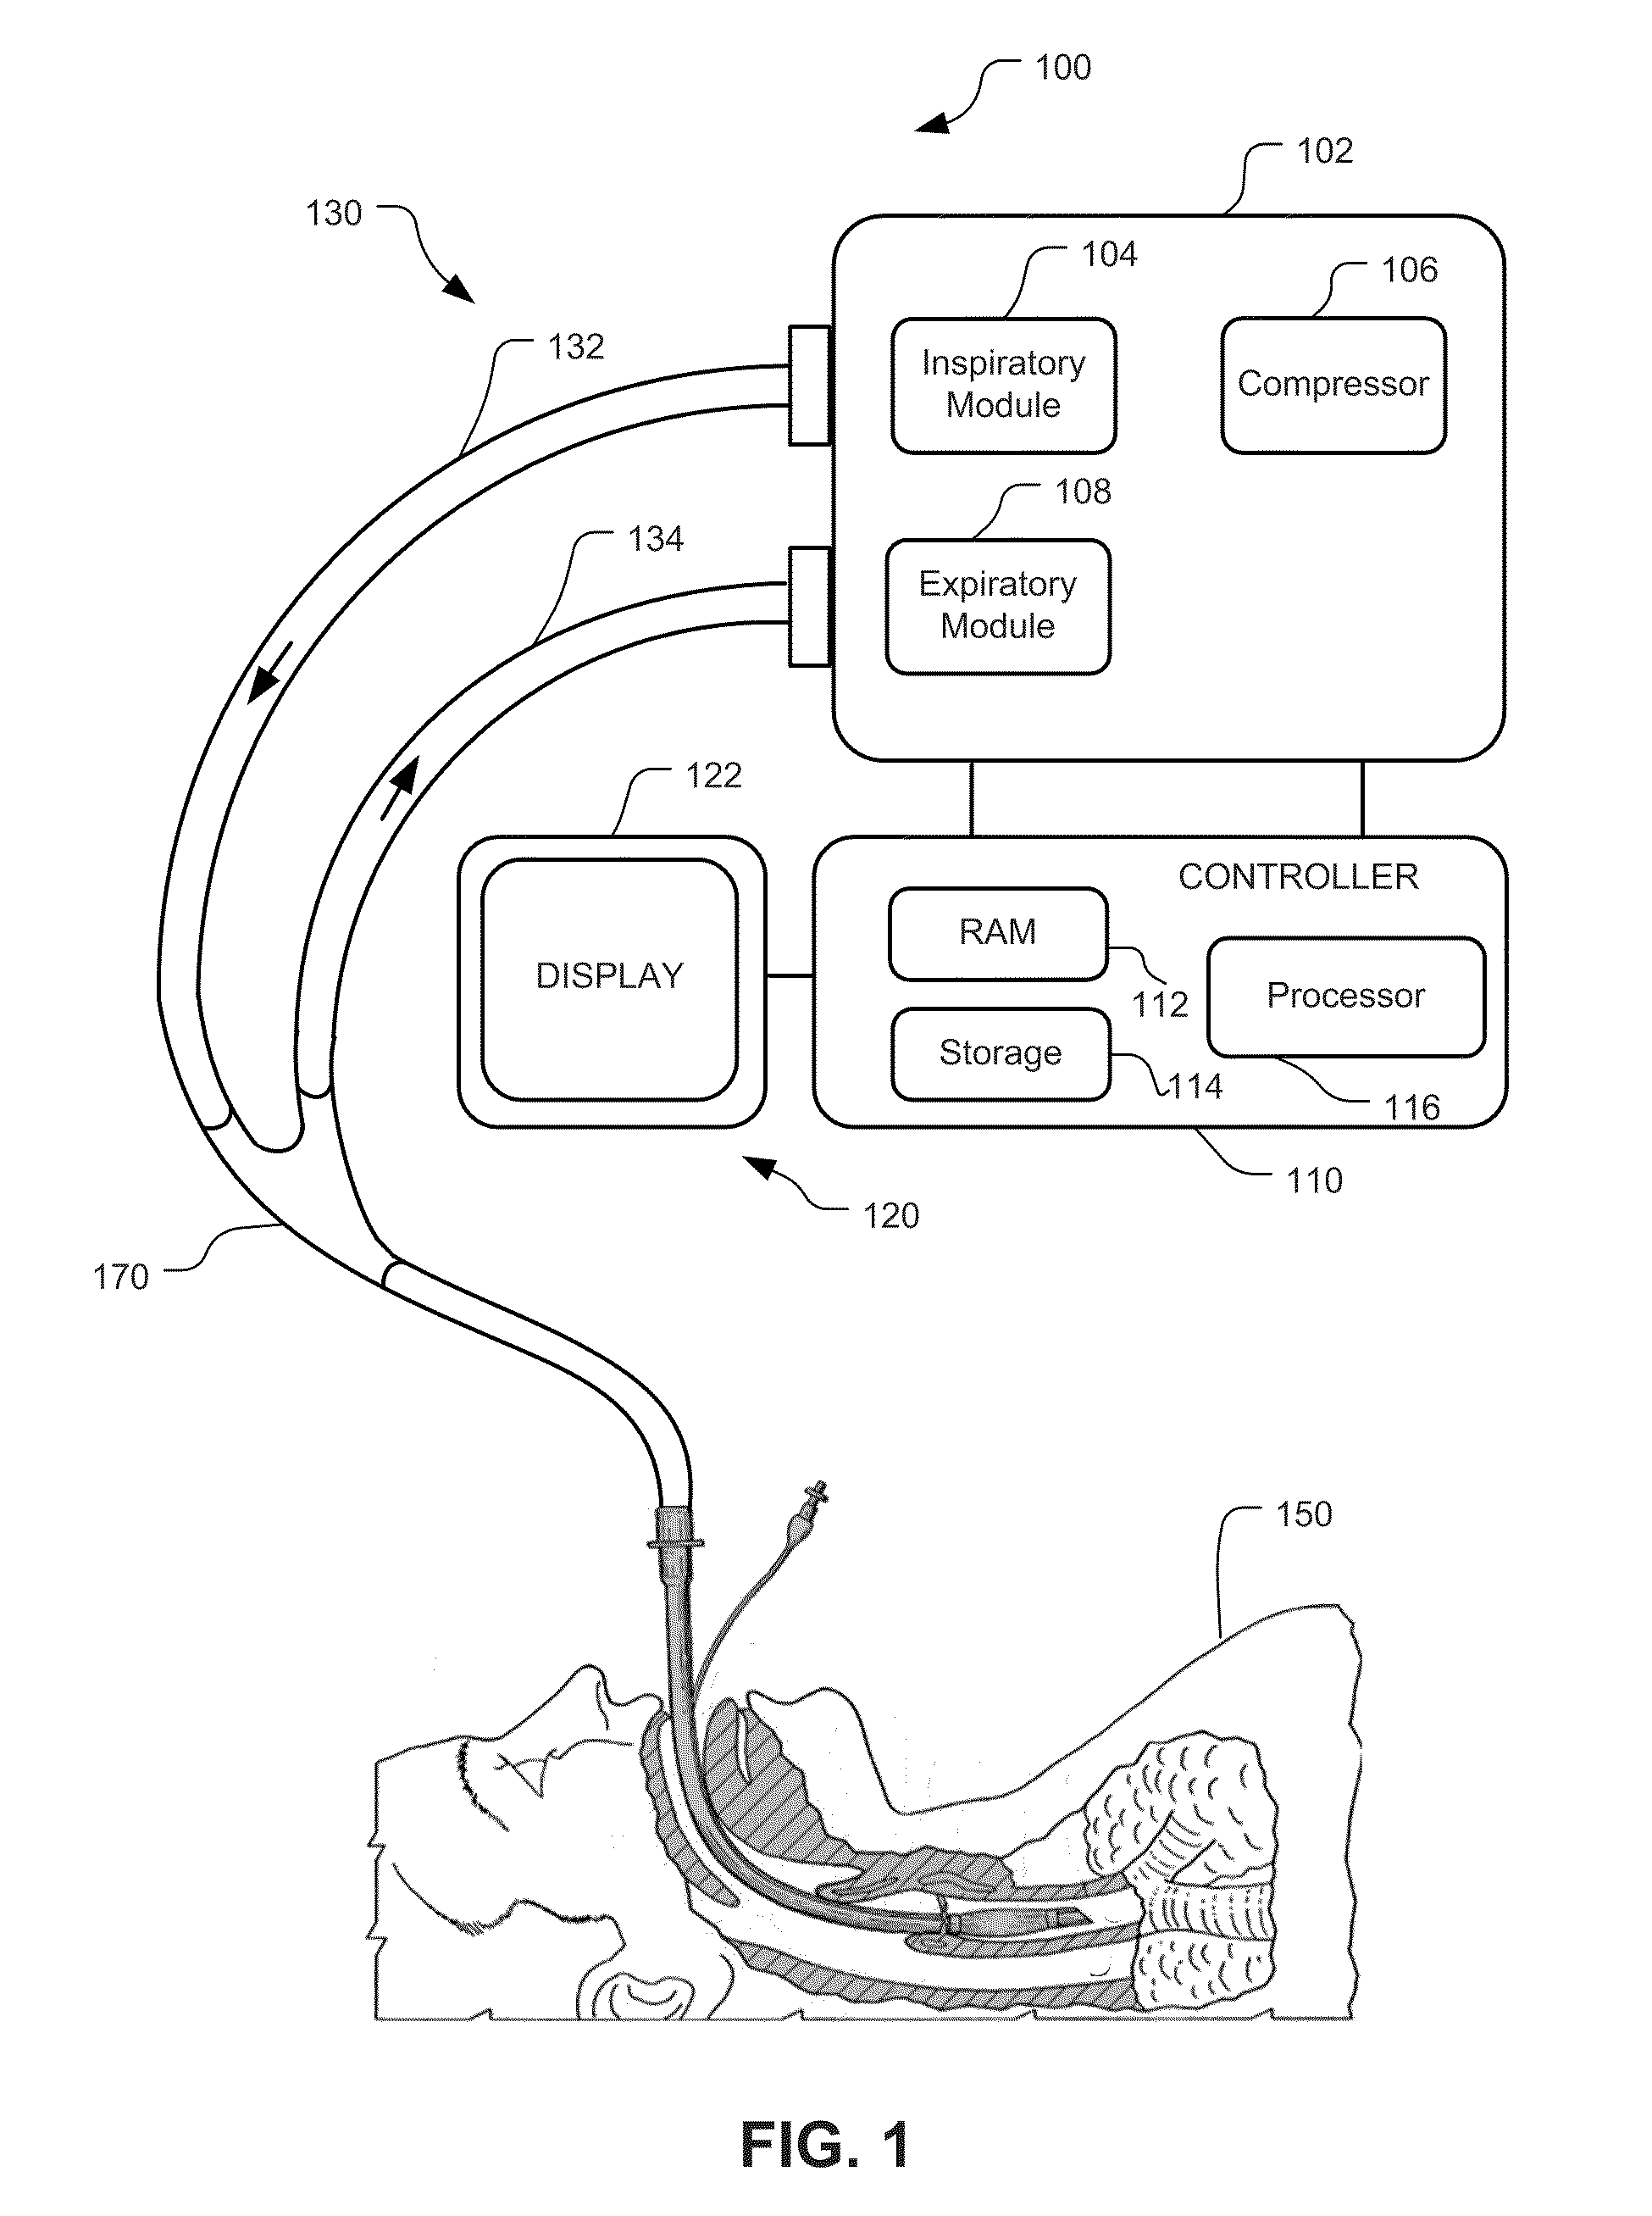 Display And Access To Settings On A Ventilator Graphical User Interface